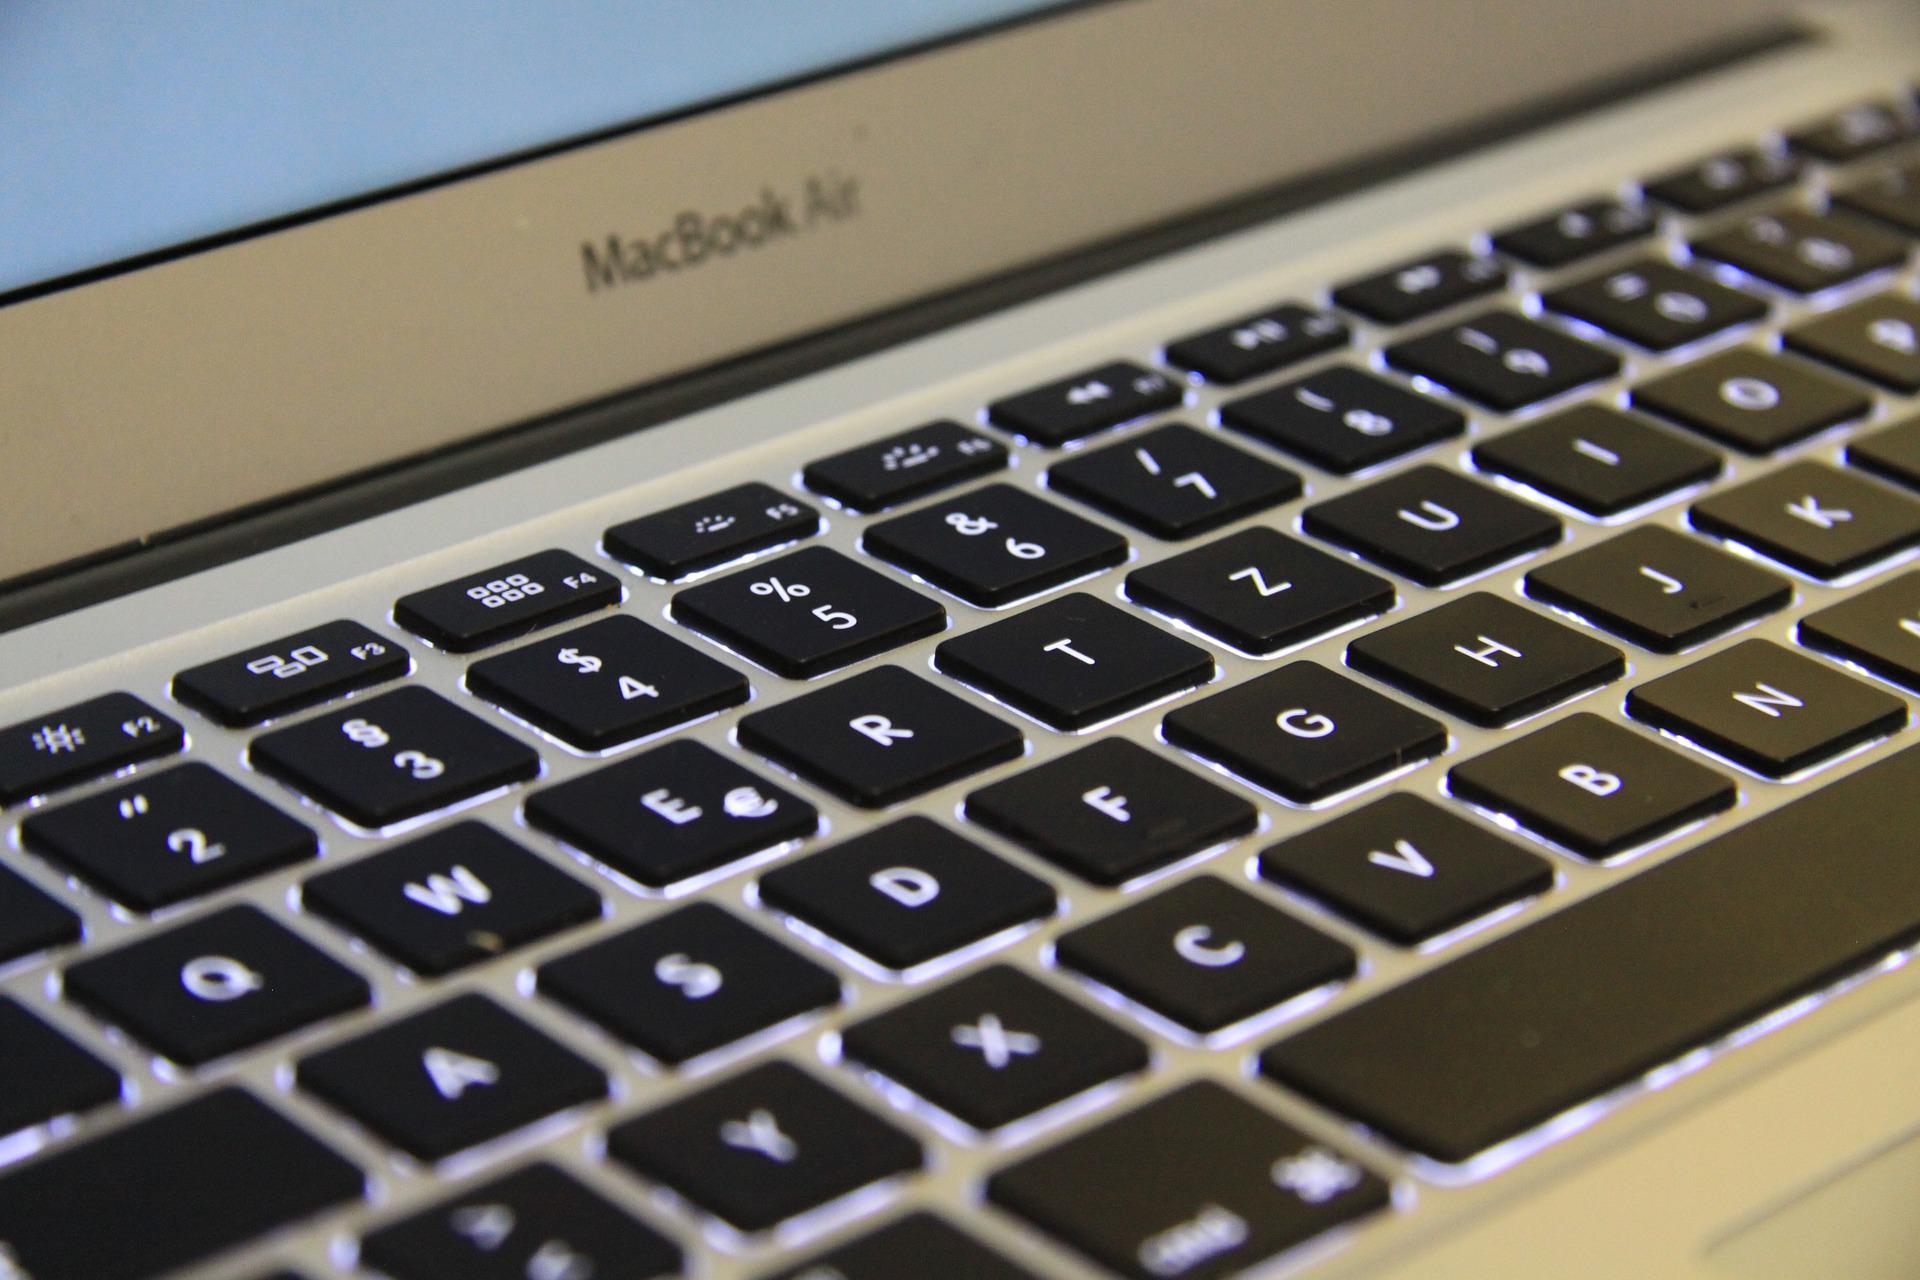 4 Ways to Right Click on MacBook Air Pro